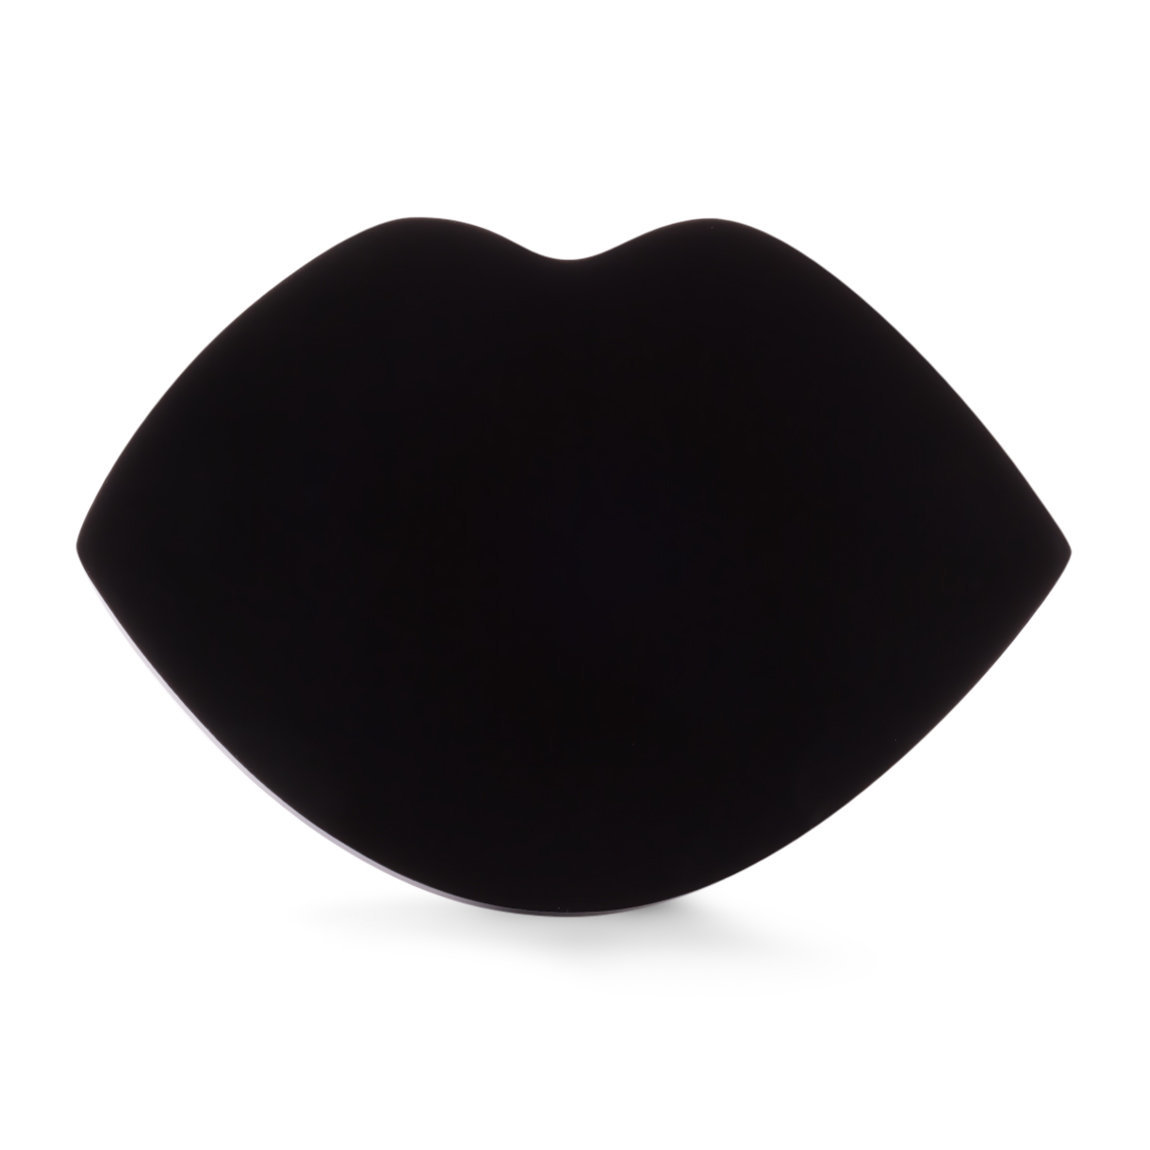 Paw Palette Regular Black Smooches alternative view 1 - product swatch.